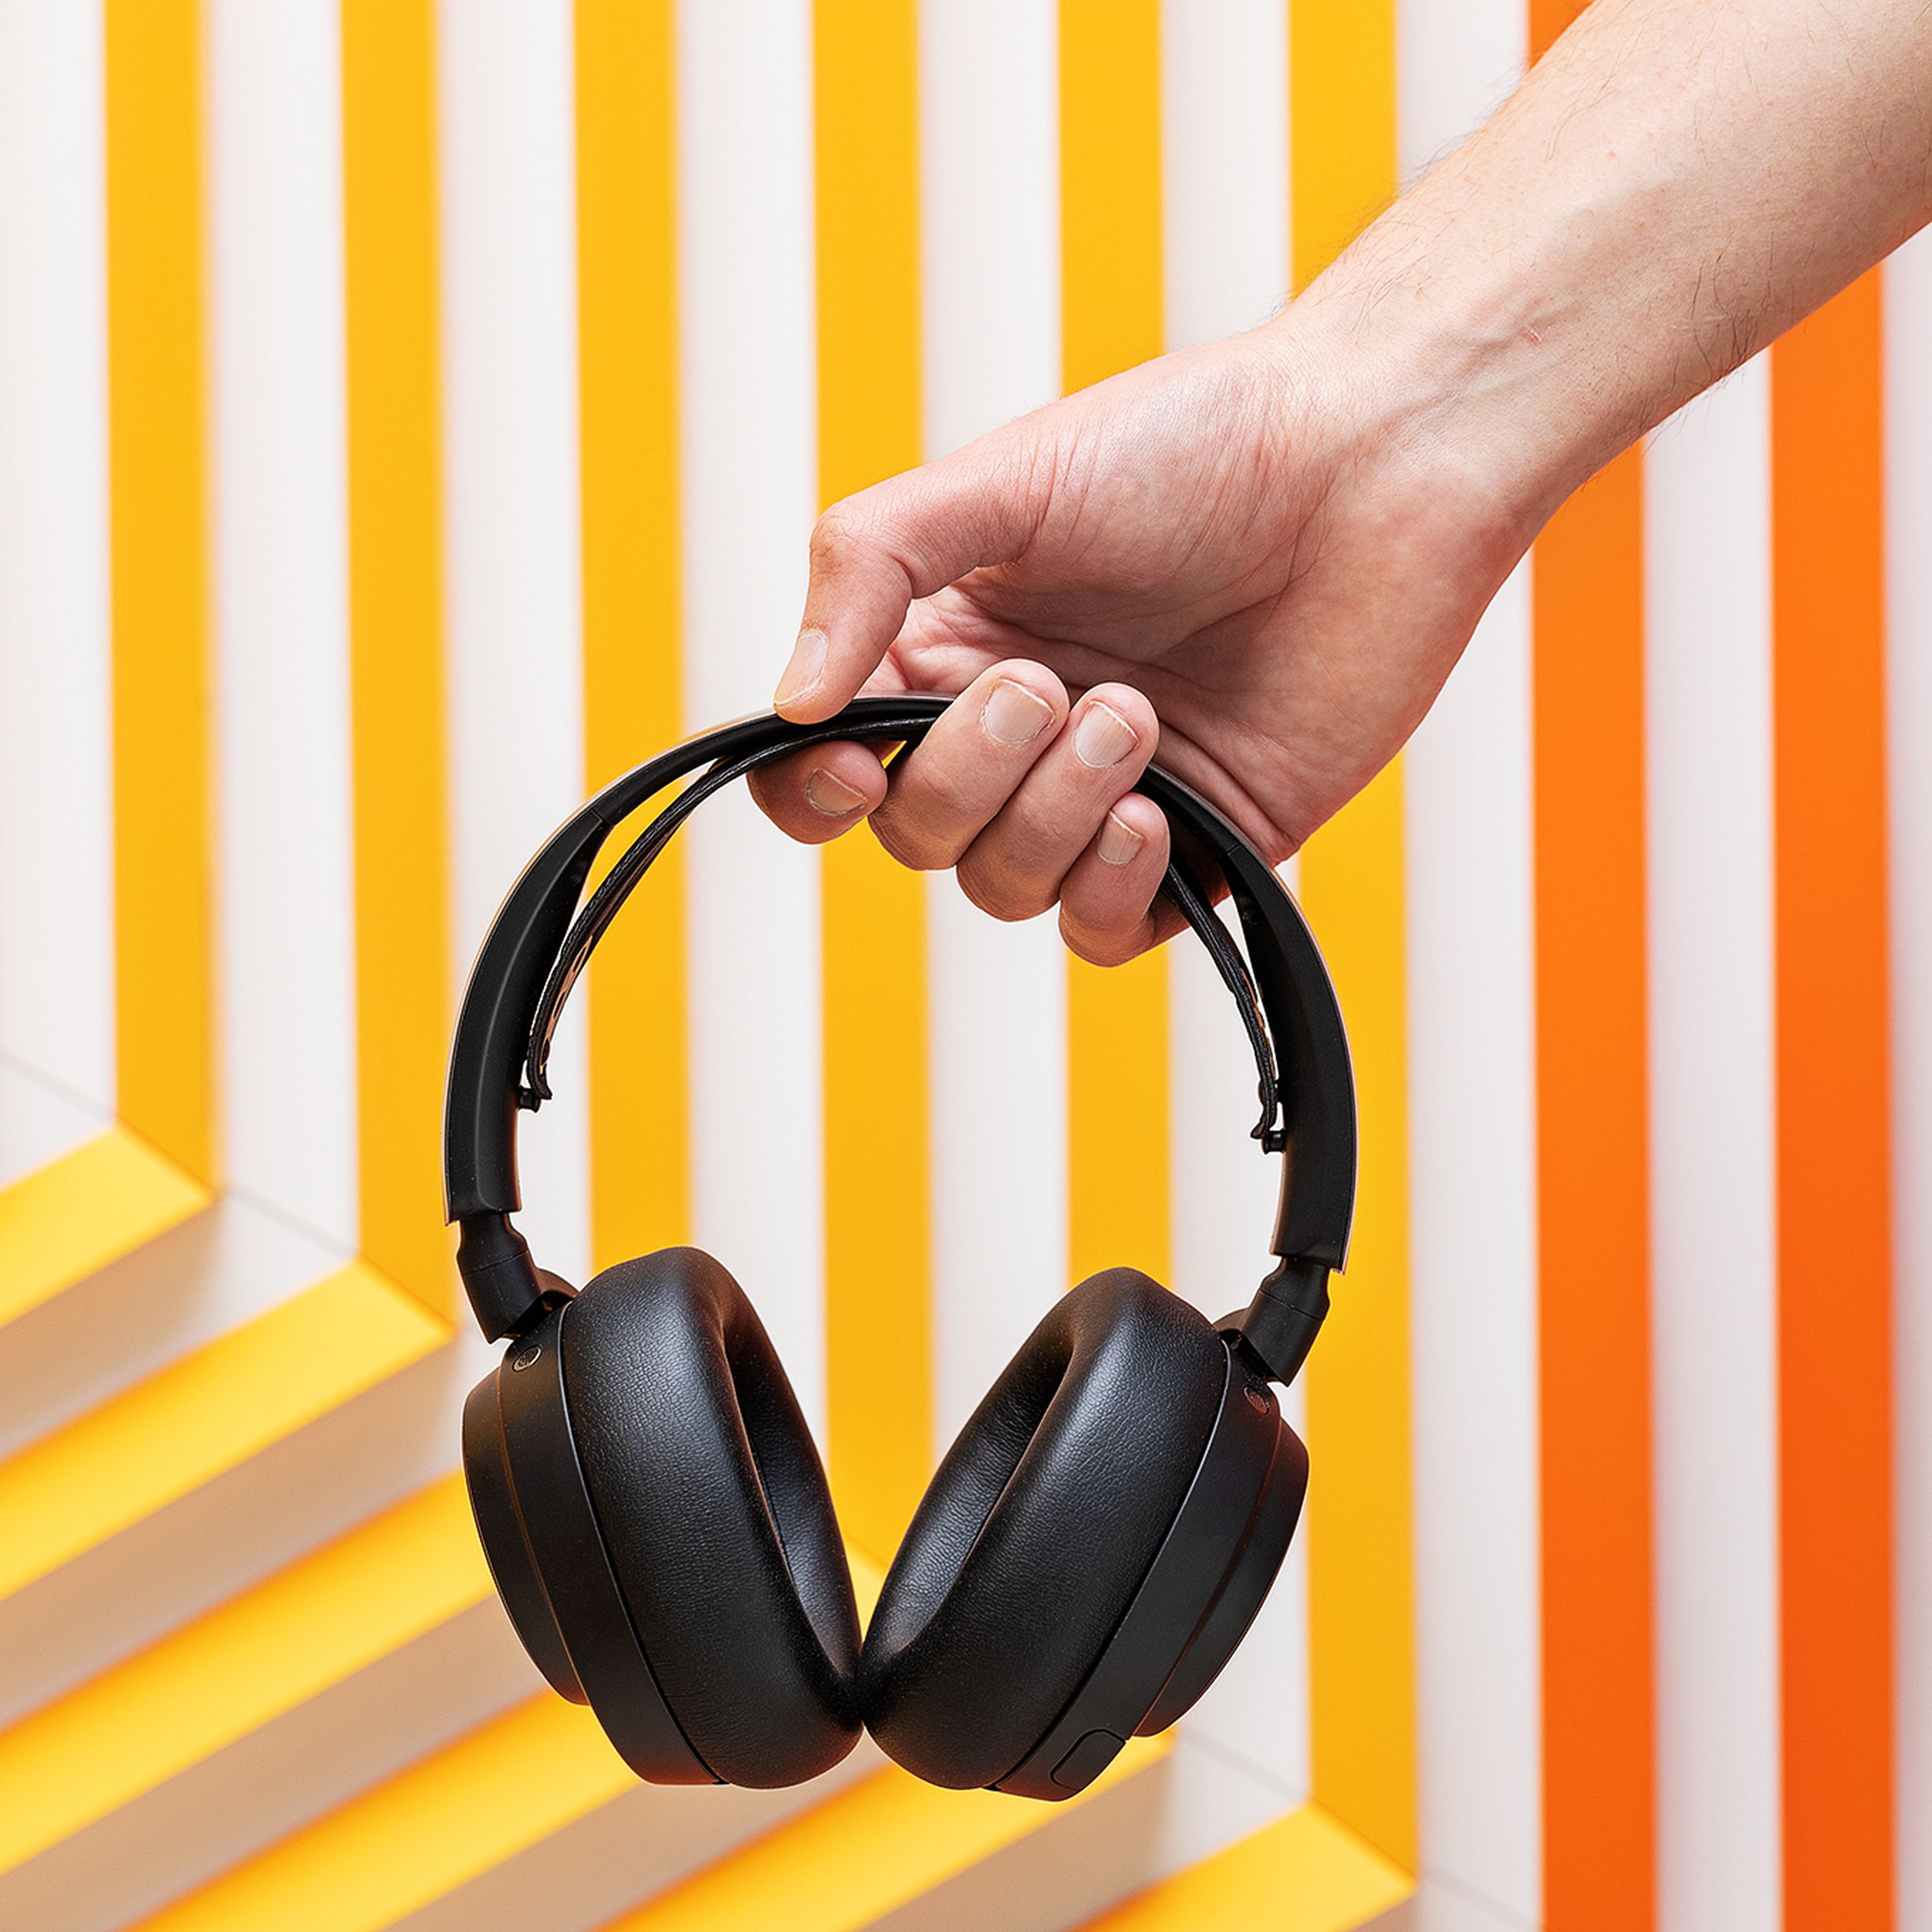 A picture of a hand holding up the black headset, on a background of orange and yellow stripes set in a geometric pattern.